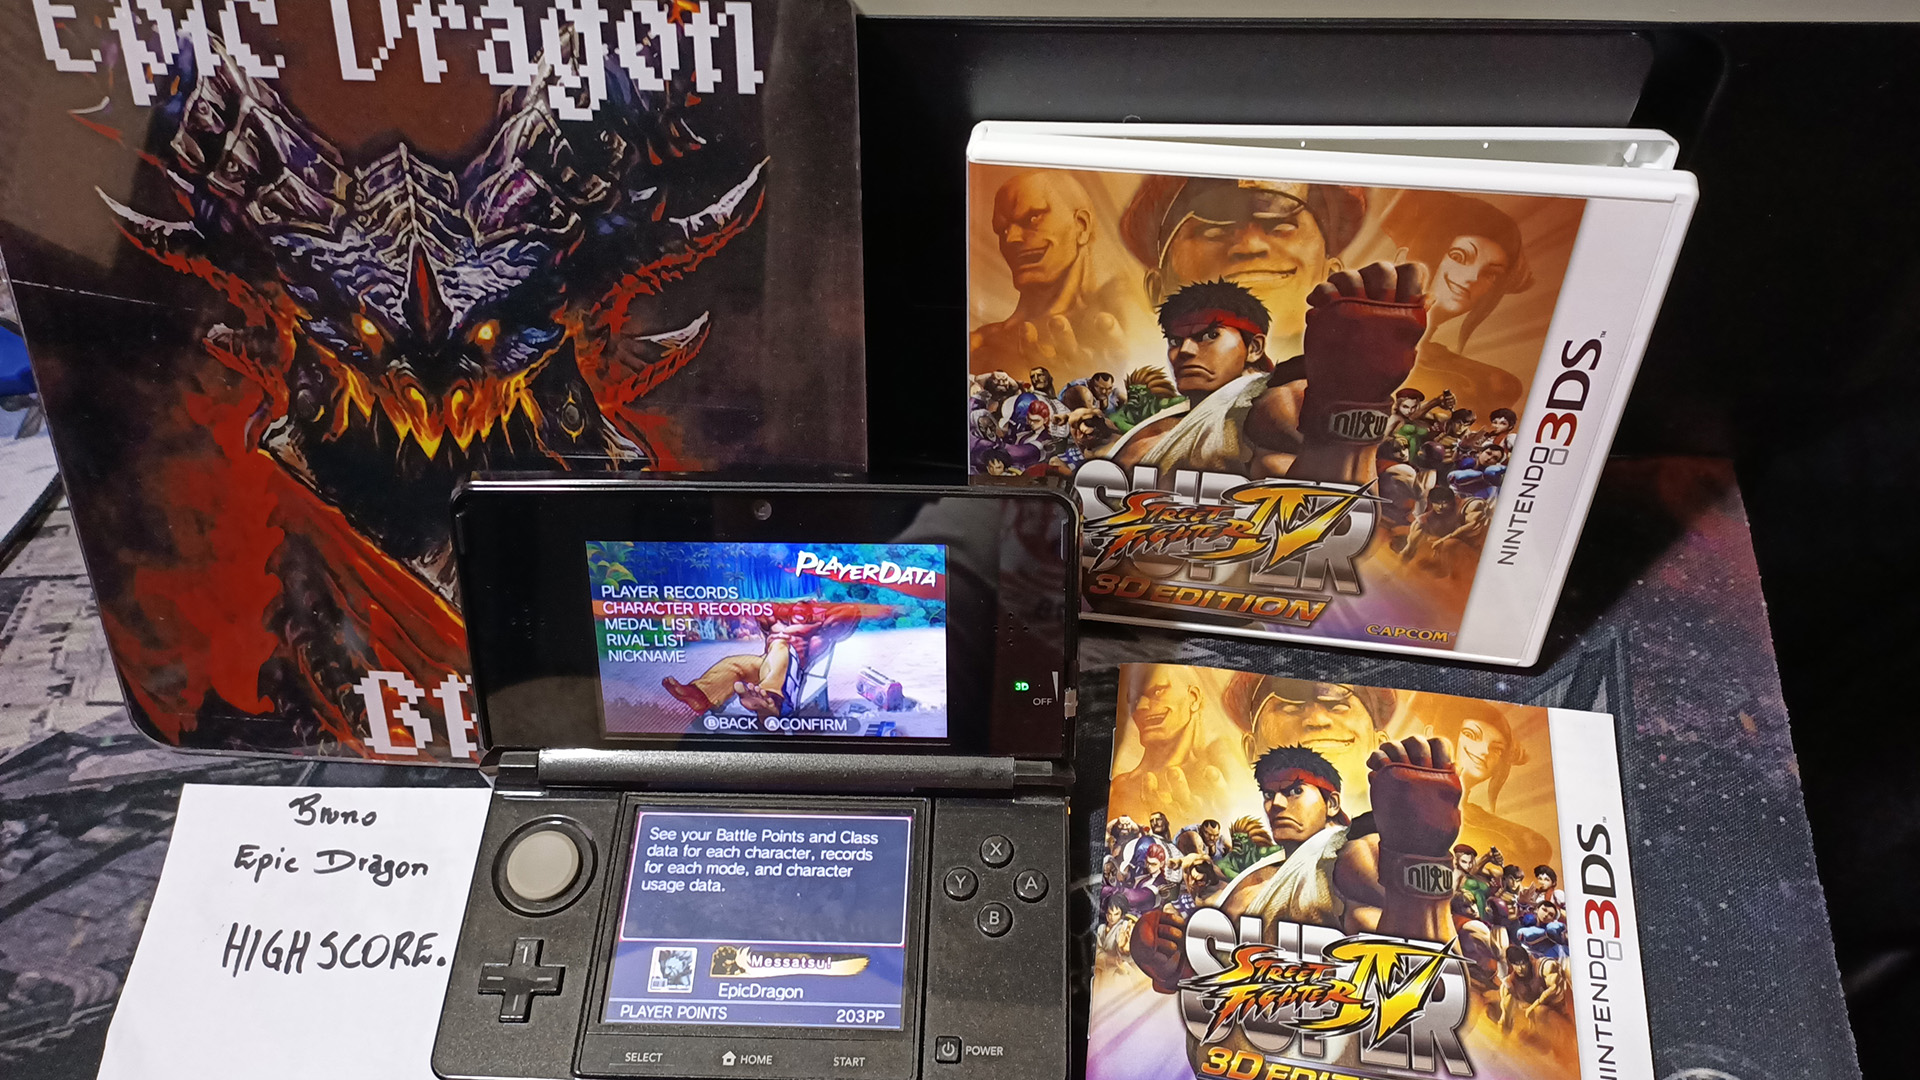 EpicDragon: Super Street Fighter IV 3D Edition: Arcade: Cammy (Nintendo 3DS) 1,036,100 points on 2022-08-01 20:53:25